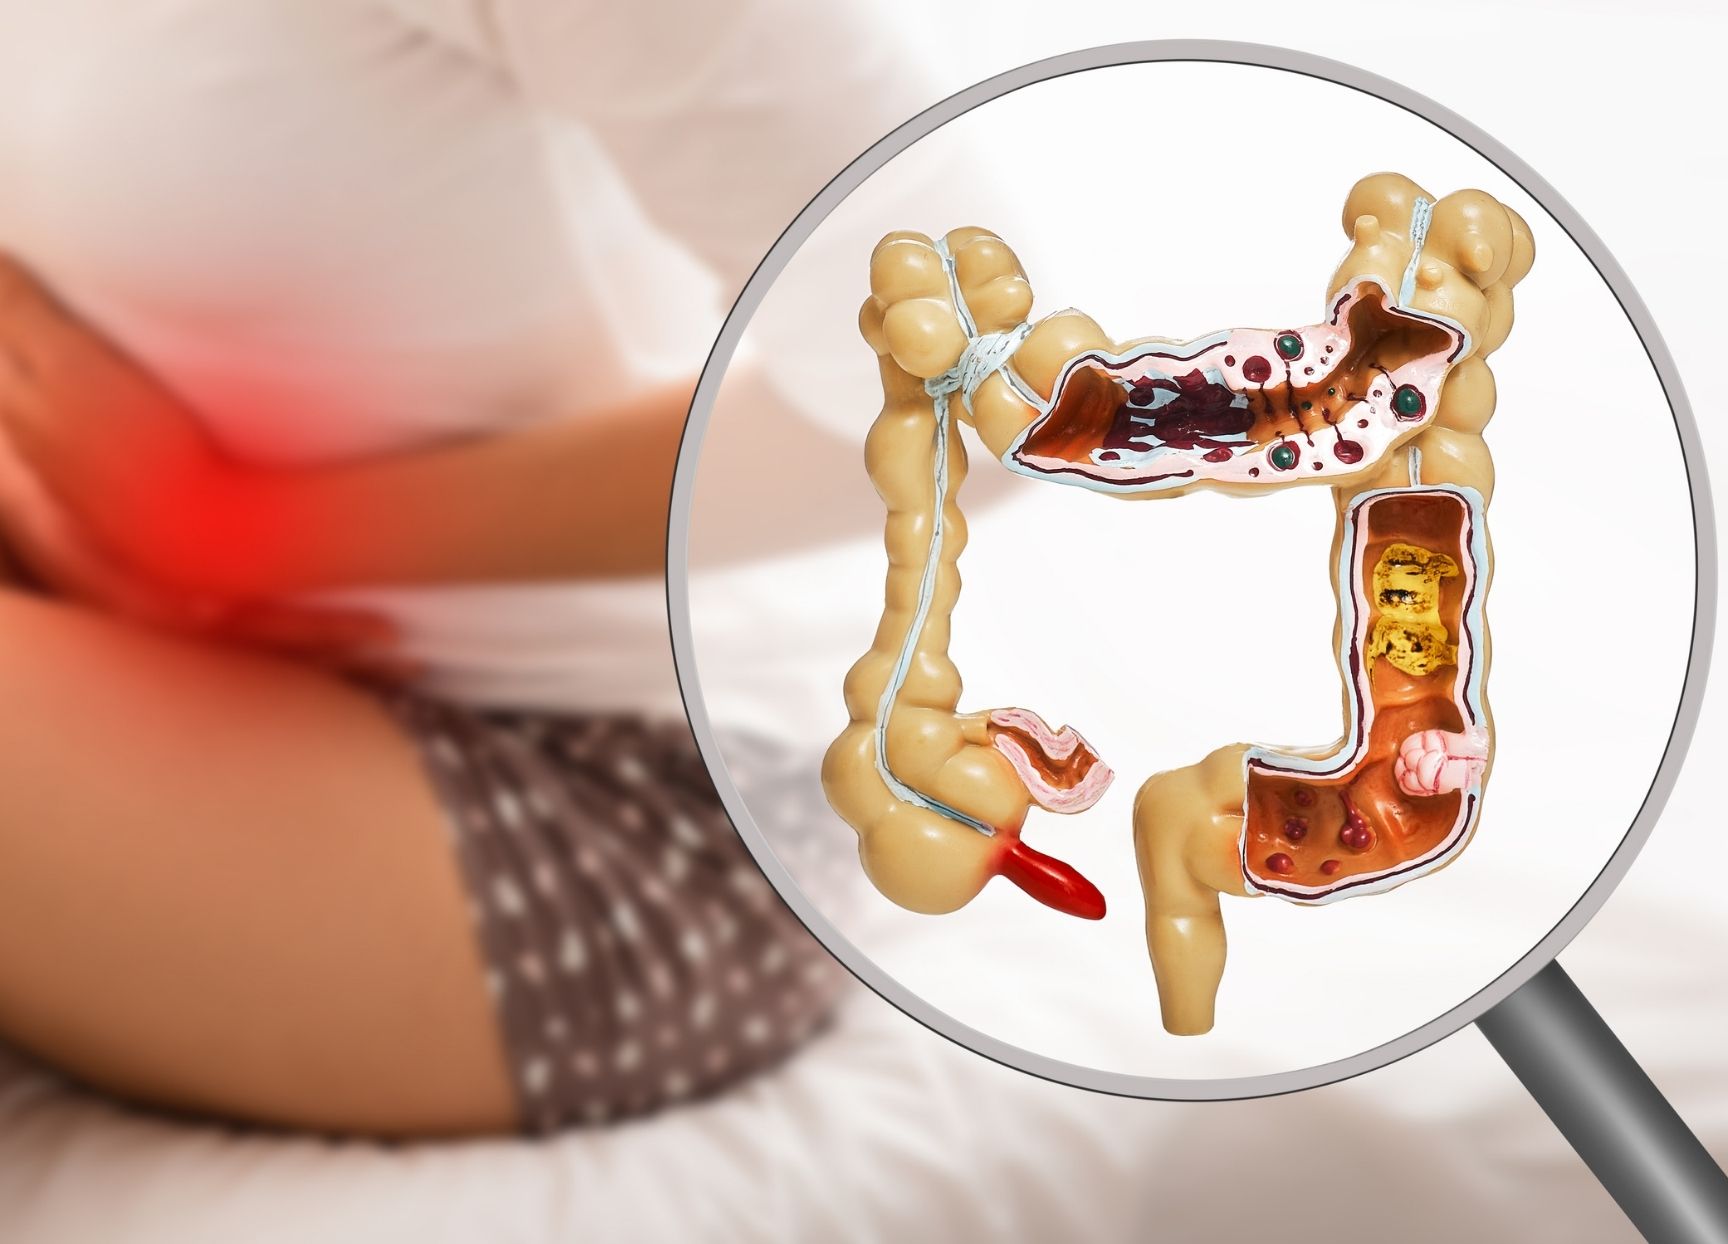 What is colitis?